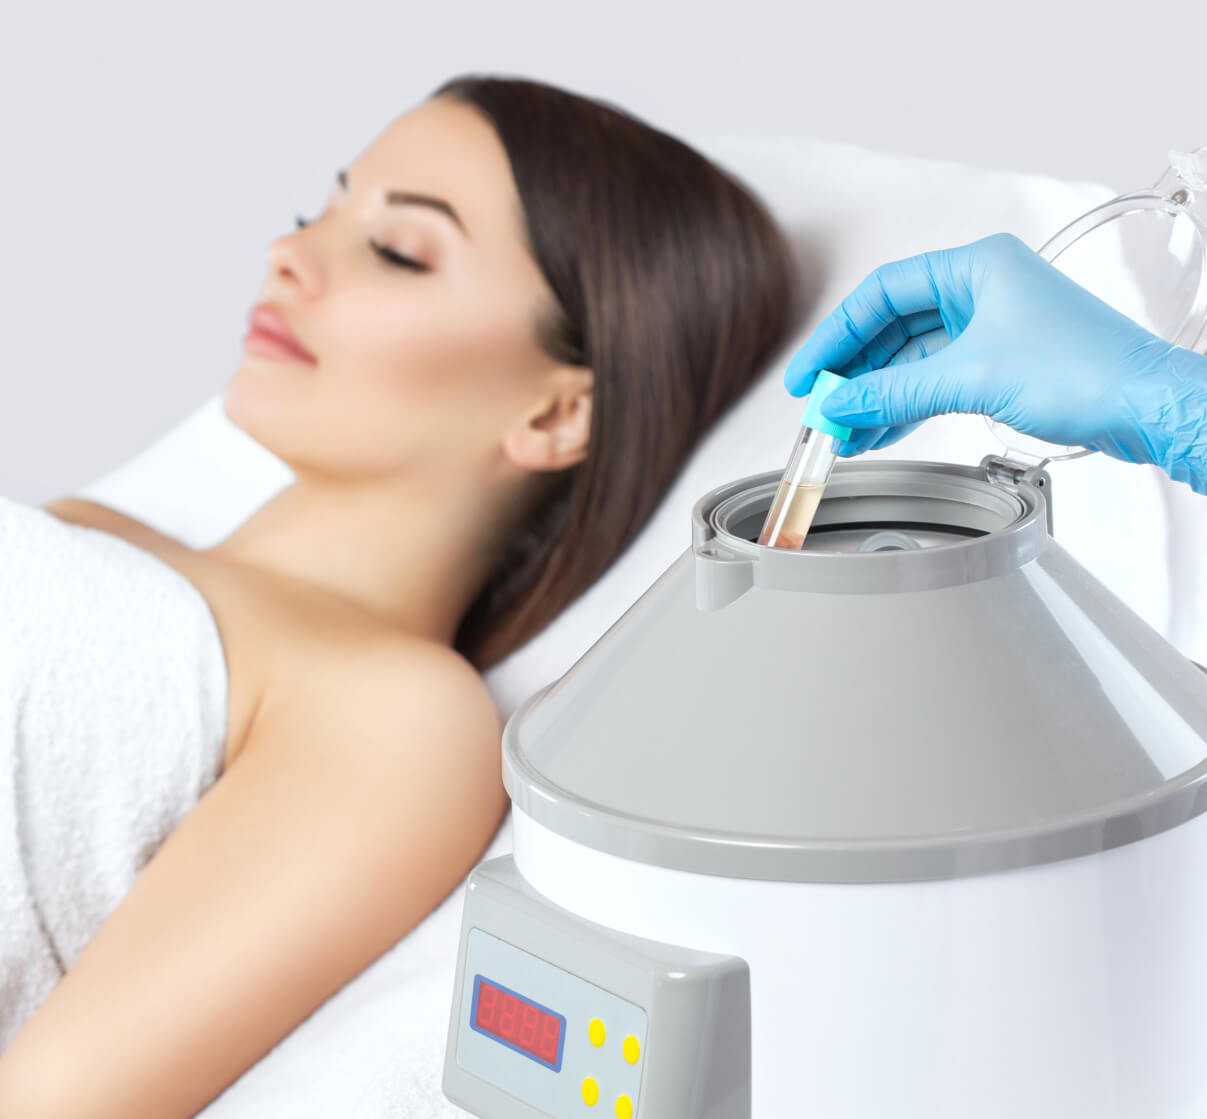 Platlet rich plasma injections at Essential Aesthetics